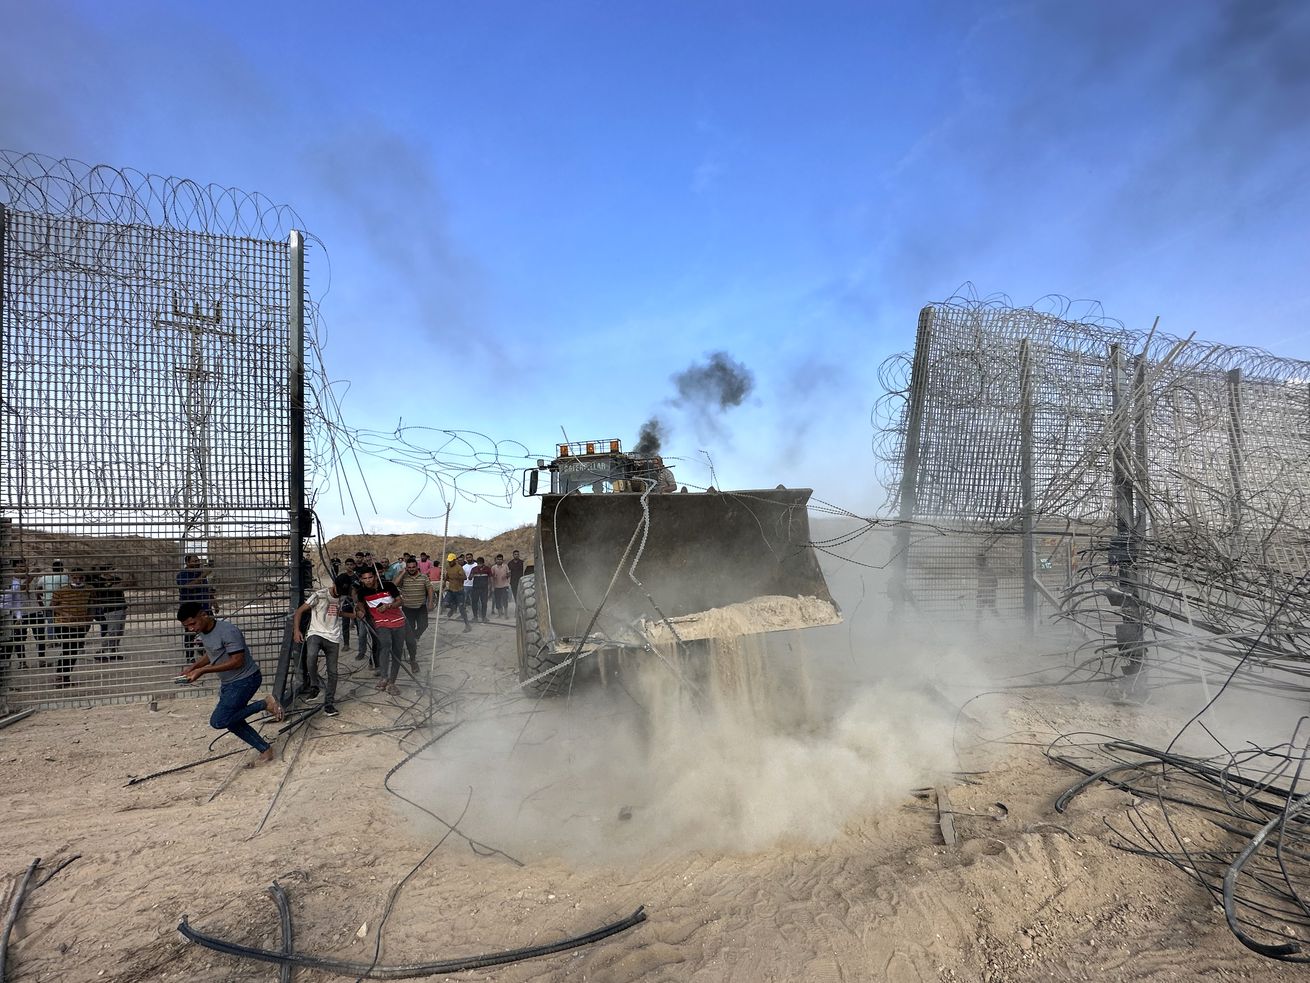 A truck is seen breaking through a fence. 